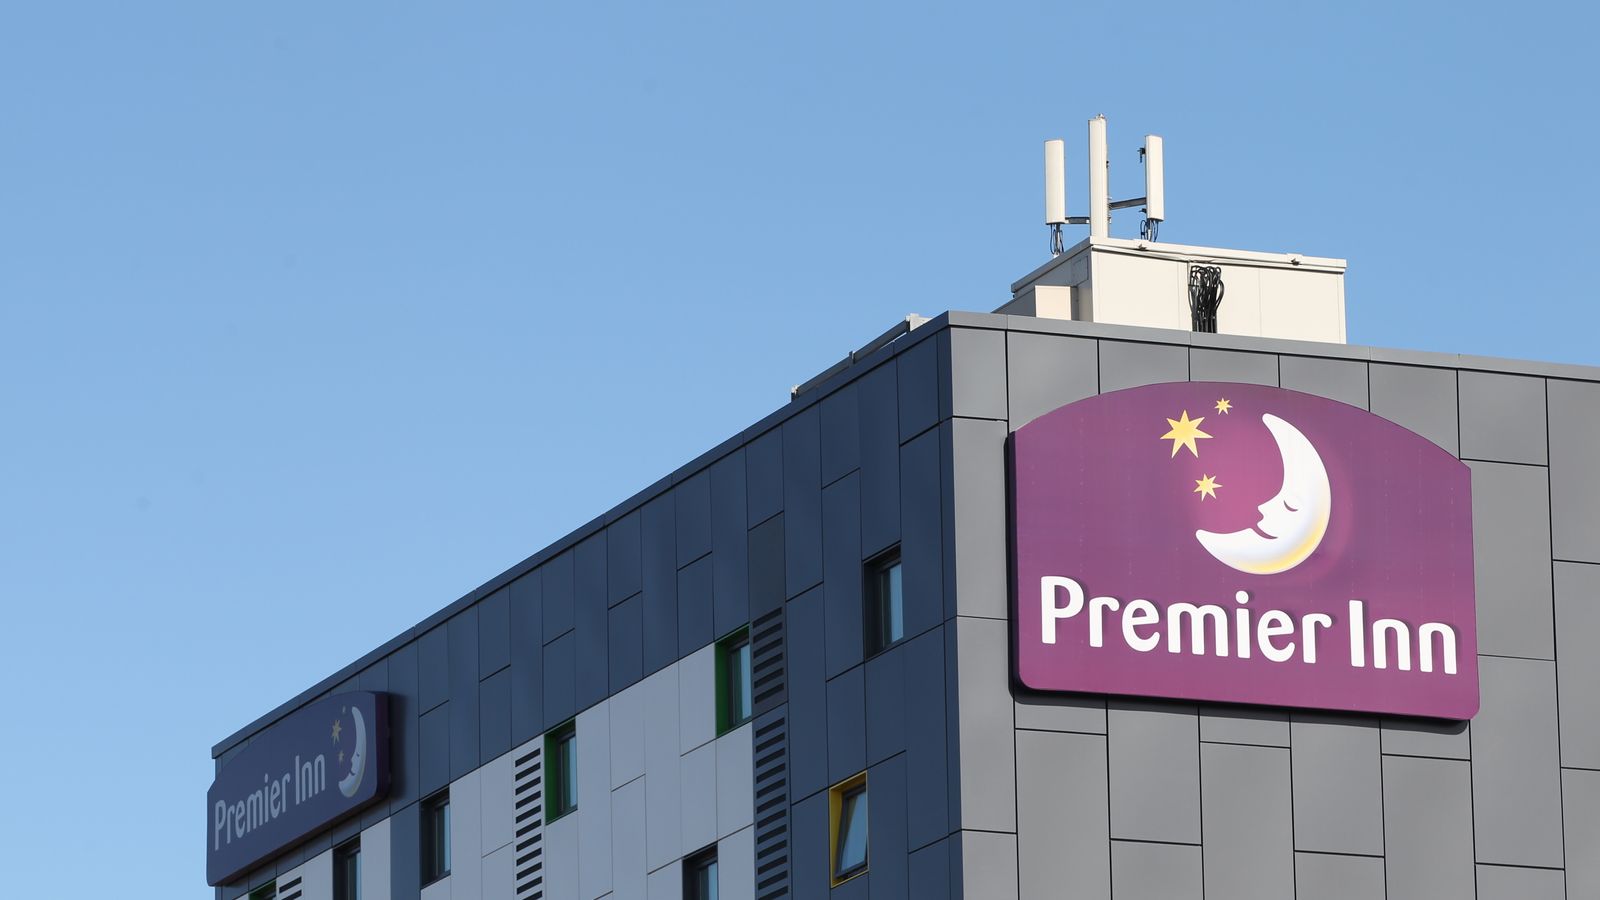 Premier Inn banned from advertising rooms 'from only £35 a night' by advertising authority